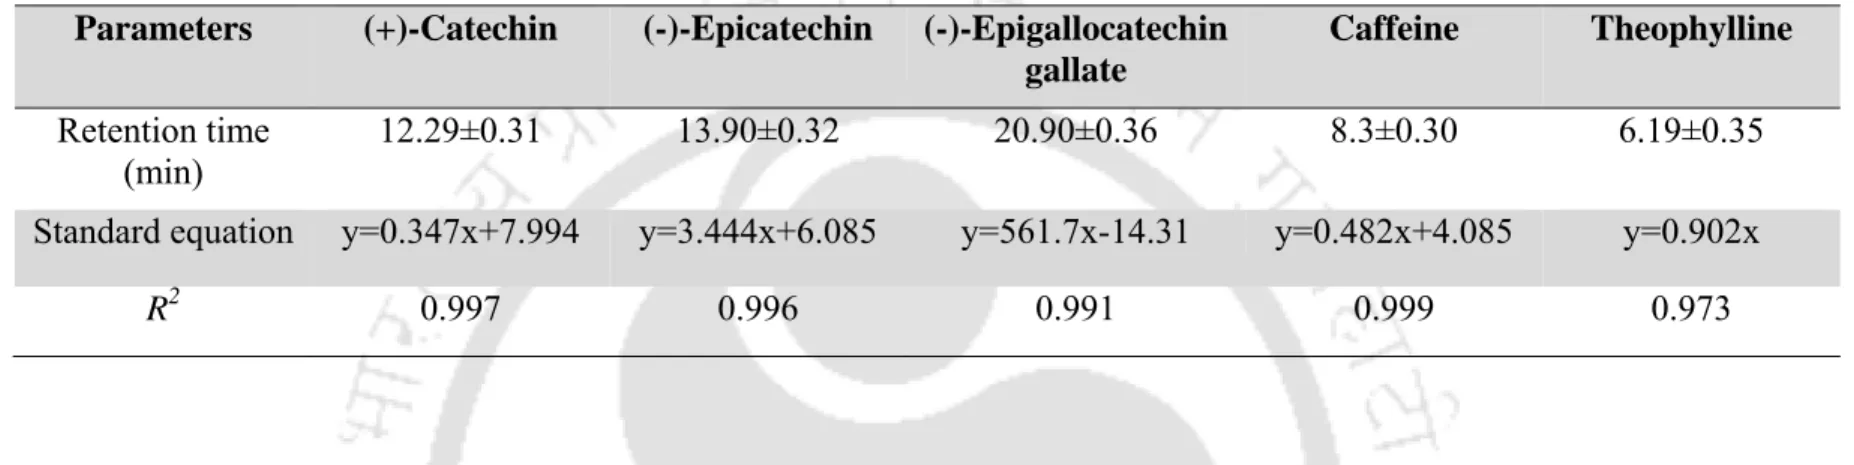 Table 3.16: Standard curves and retention times of (+)-catechin, (-)-epicatechin, (-)-epigallocatechin gallate, caffeine and theophylline   Parameters  (+)-Catechin  (-)-Epicatechin  (-)-Epigallocatechin 